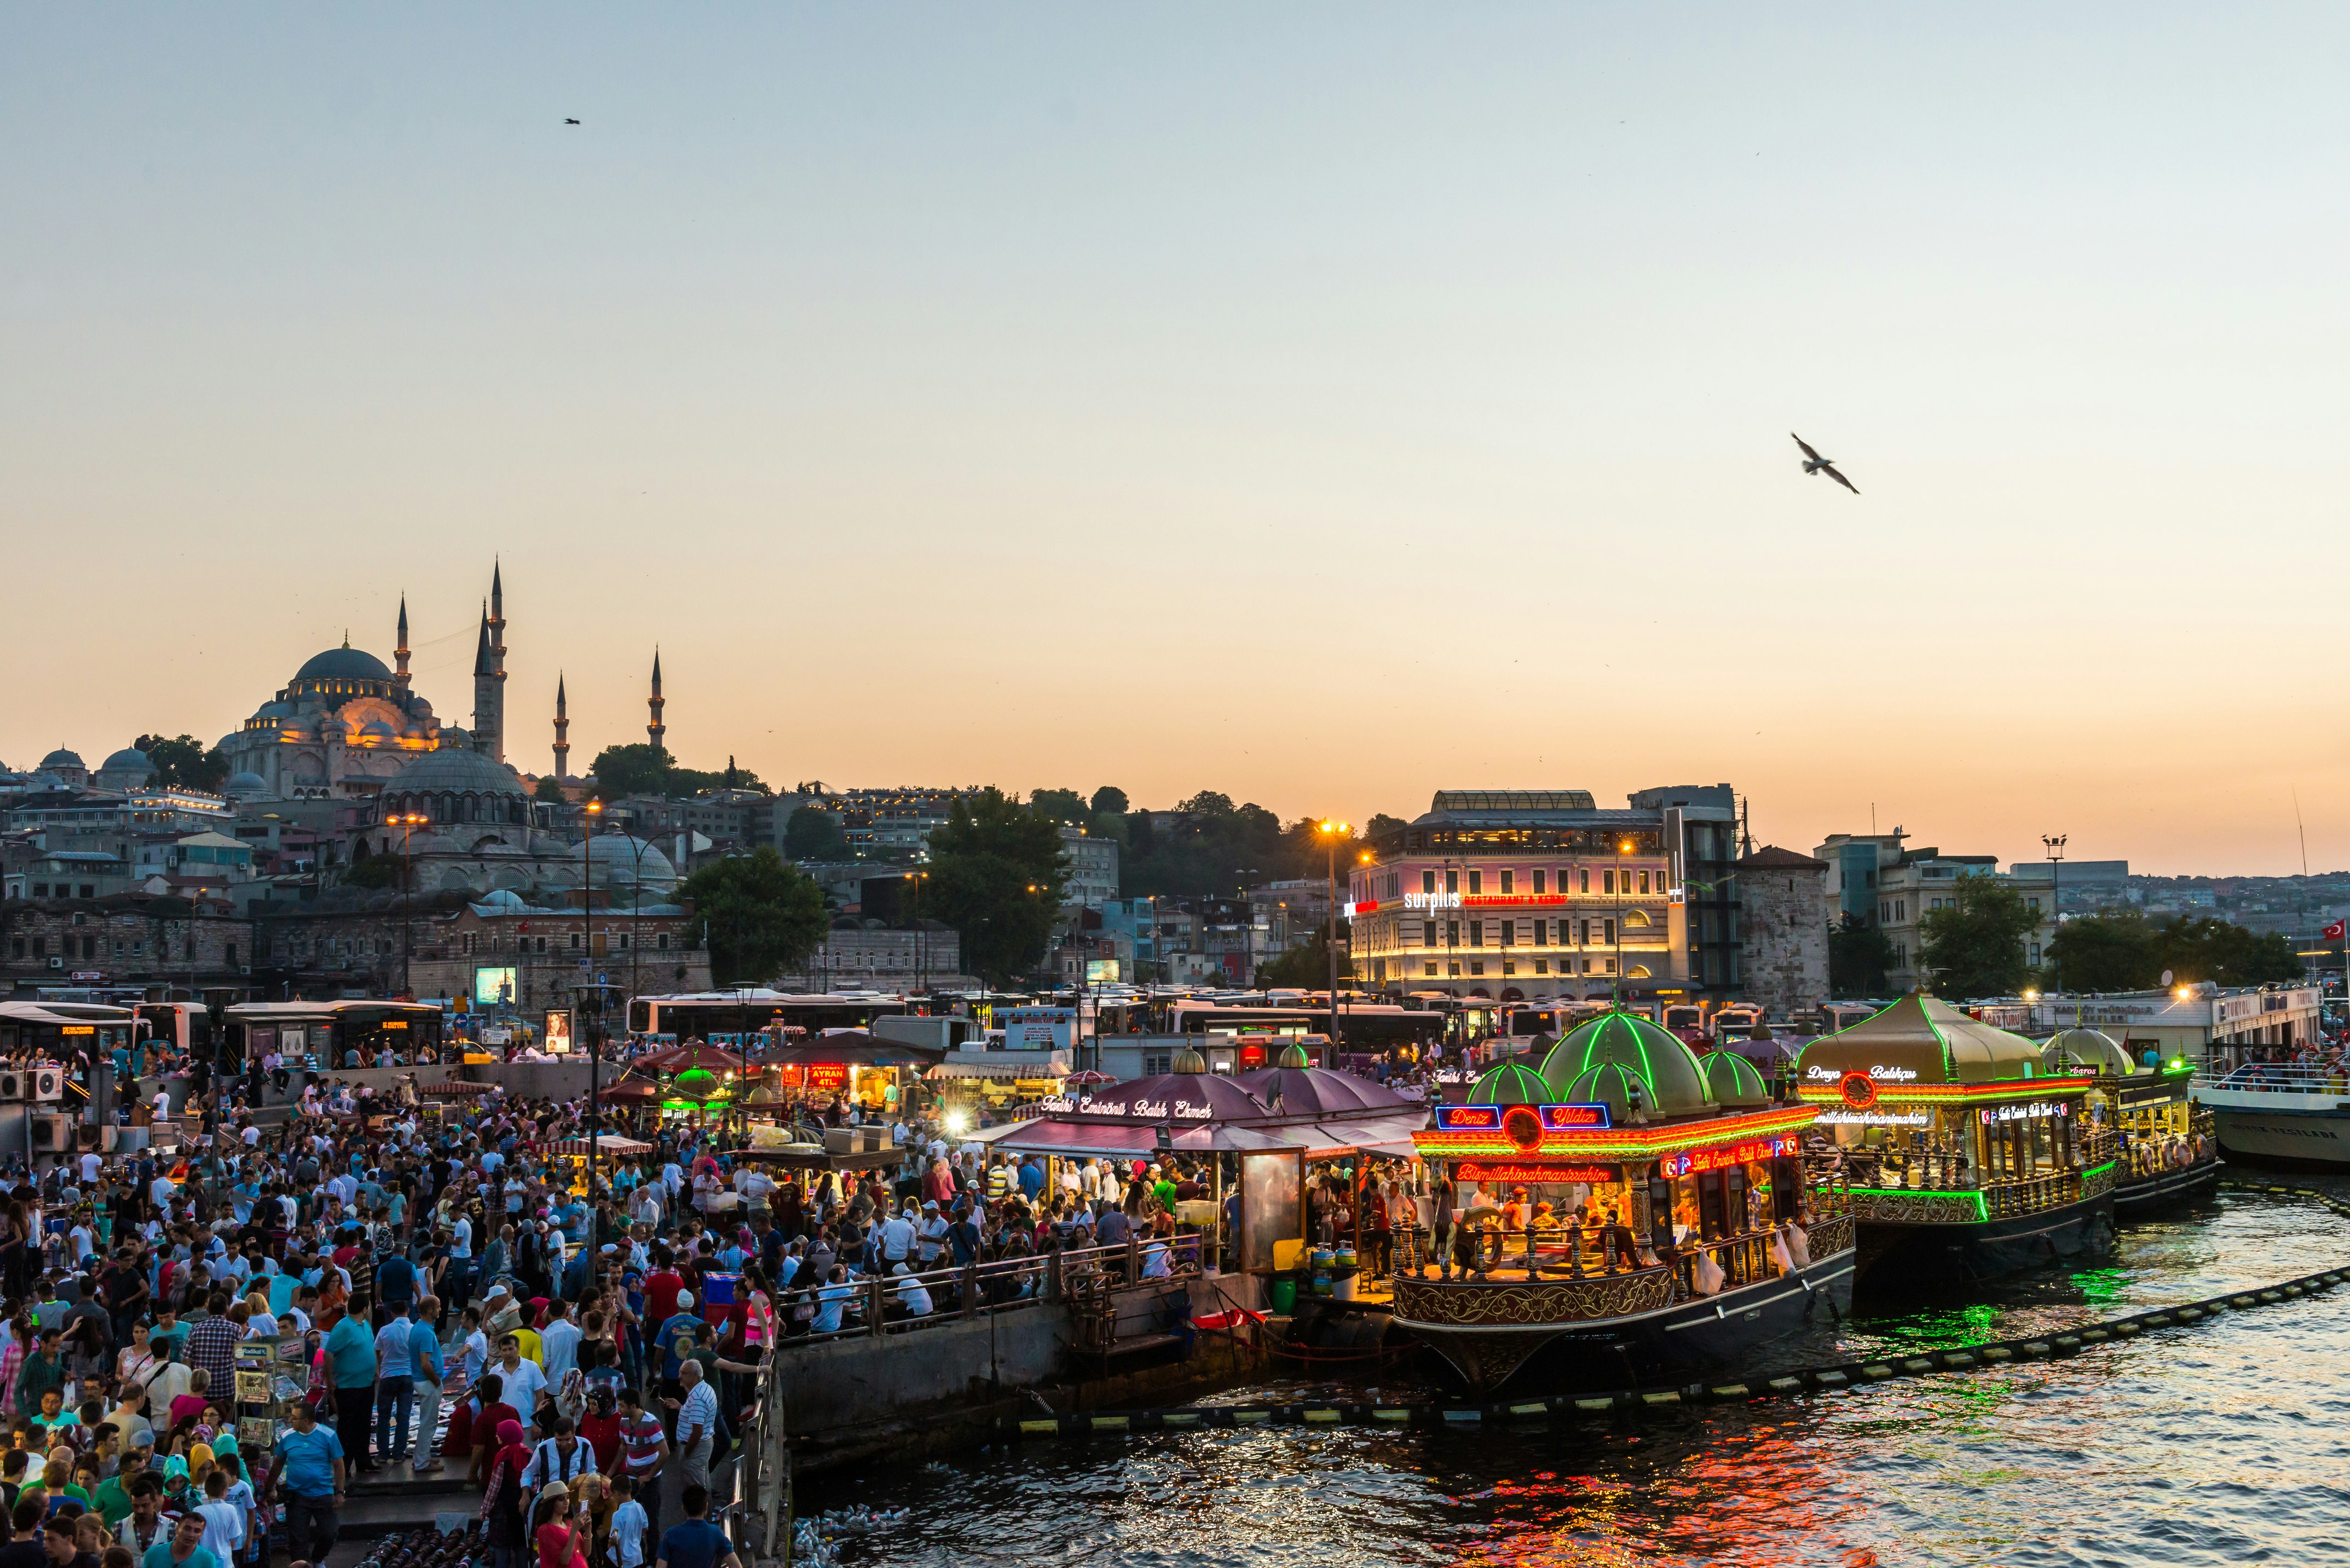 A large group of people walk along the Golden Horn in Istanabul at sunset. There are large brightly lit boats docked on the harbour.    